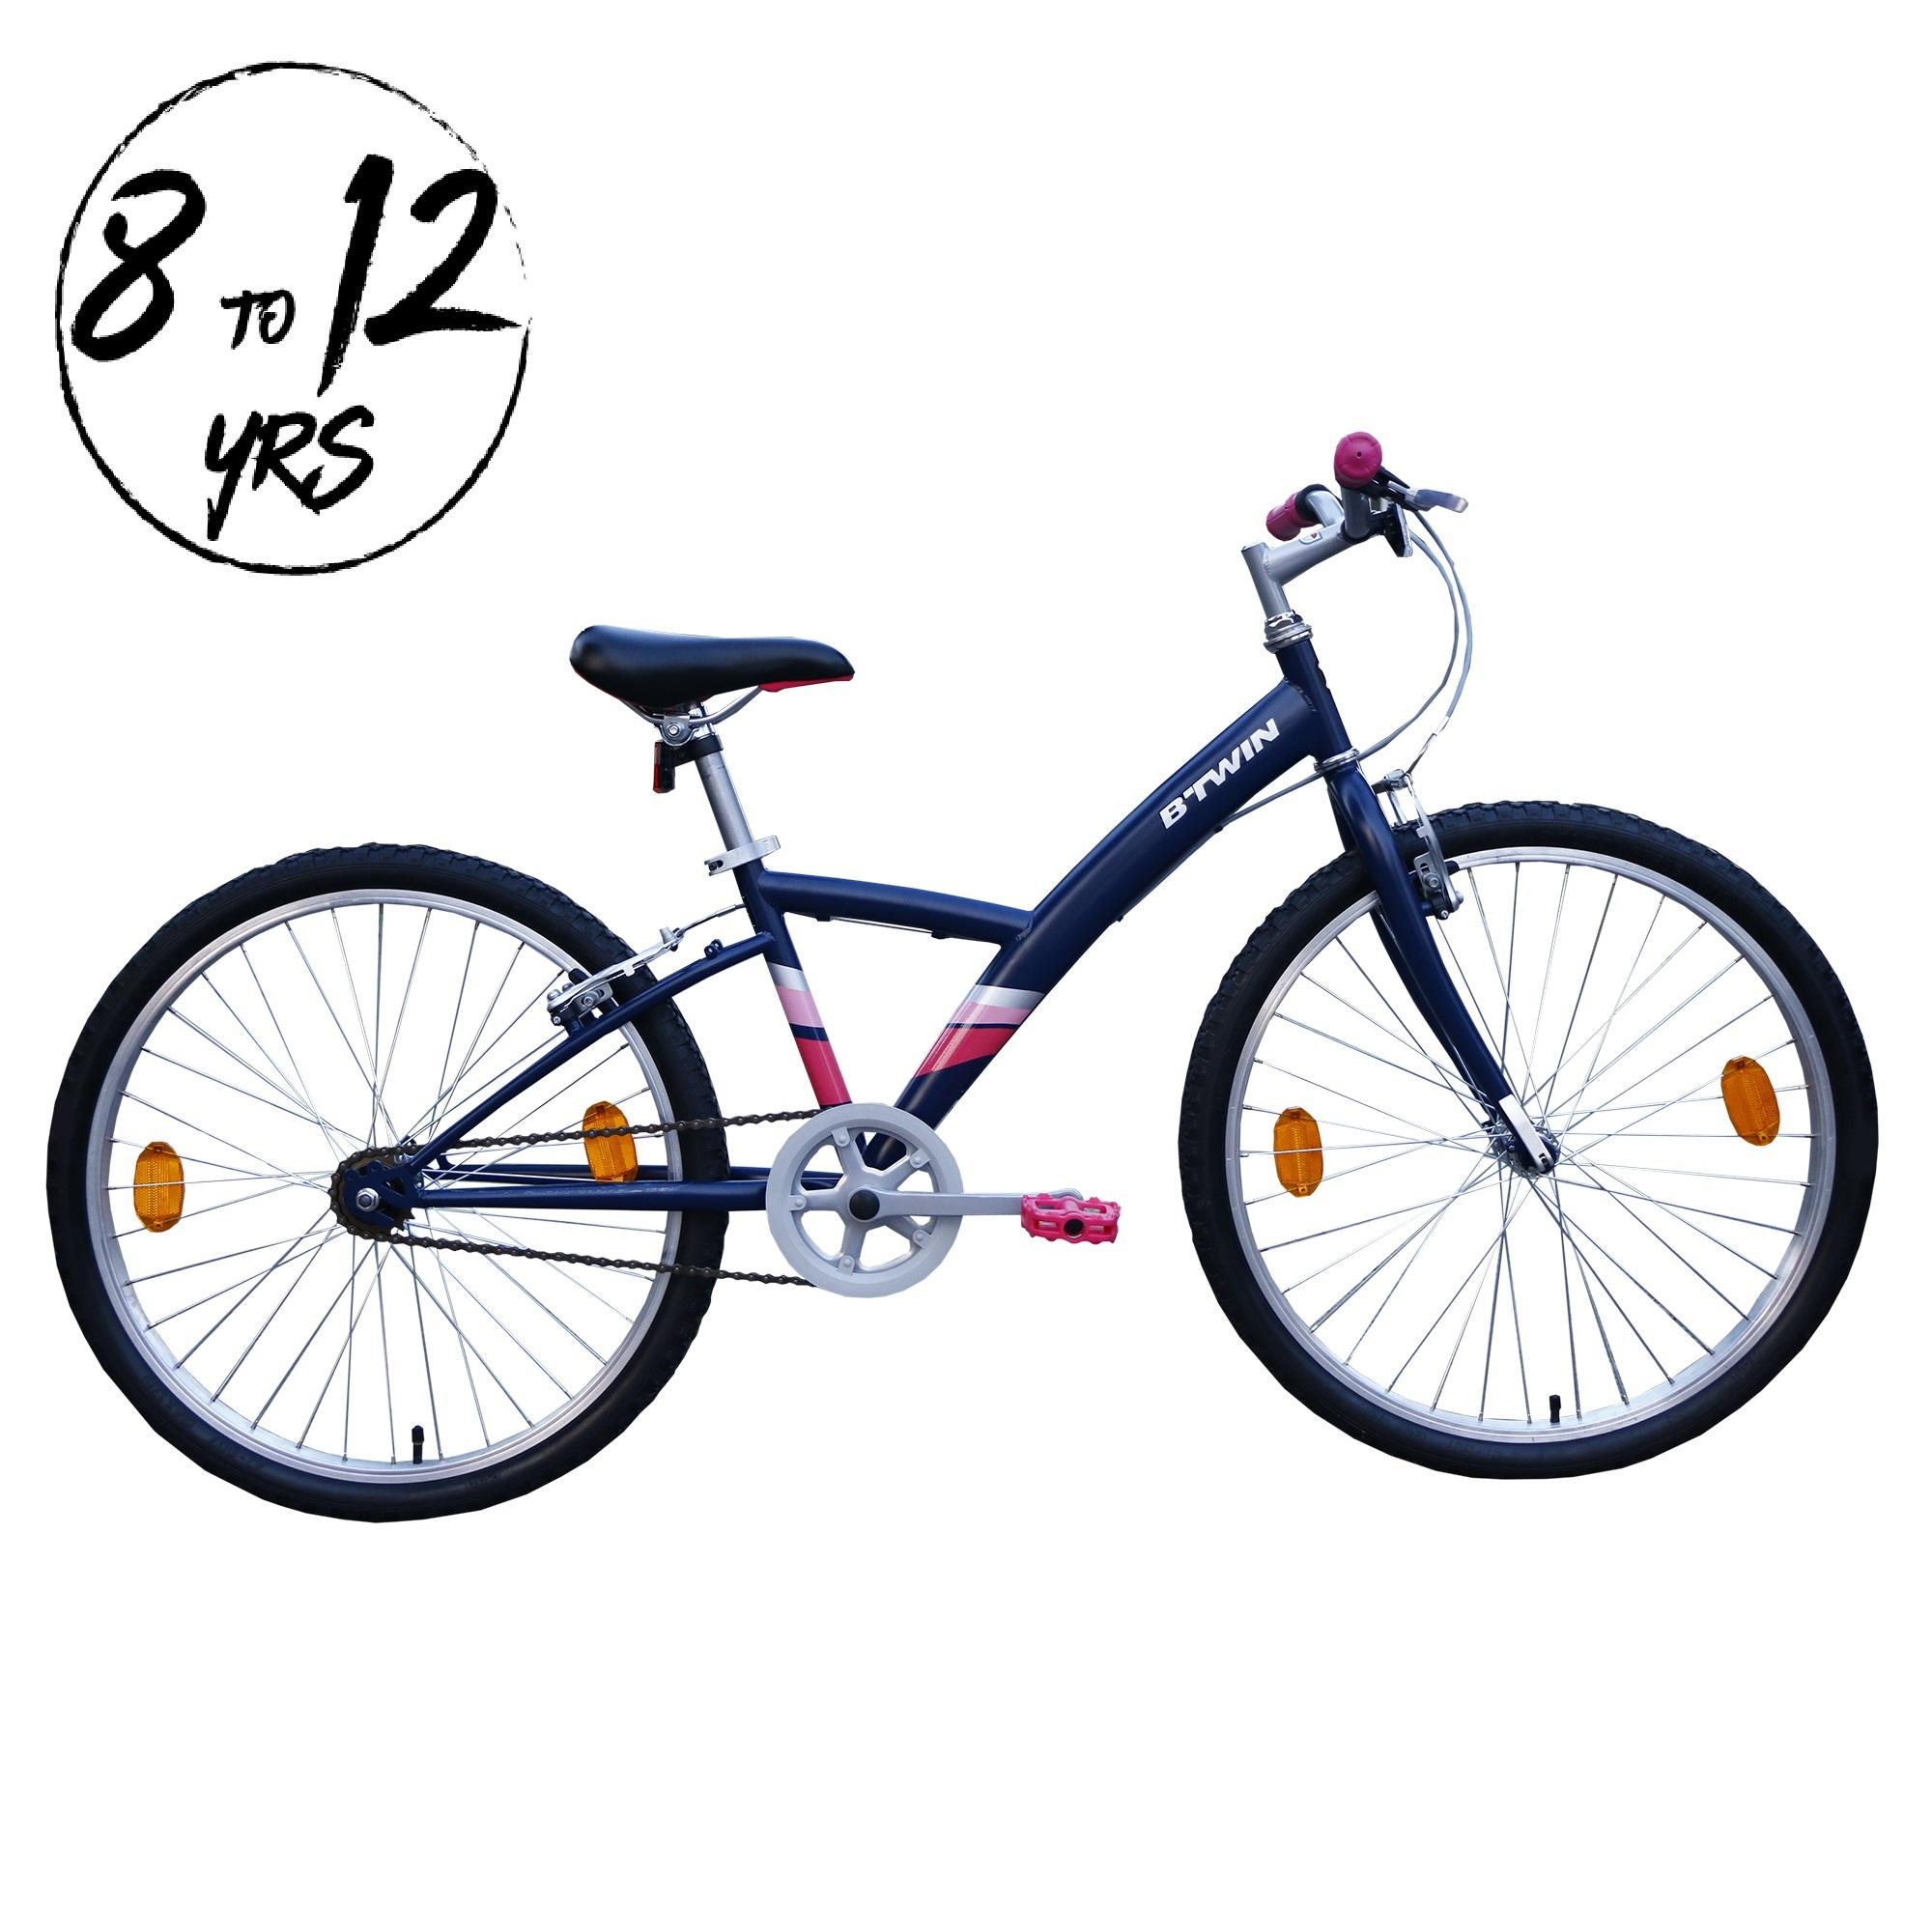 Buy Btwin Cycle Online at Decathlon India